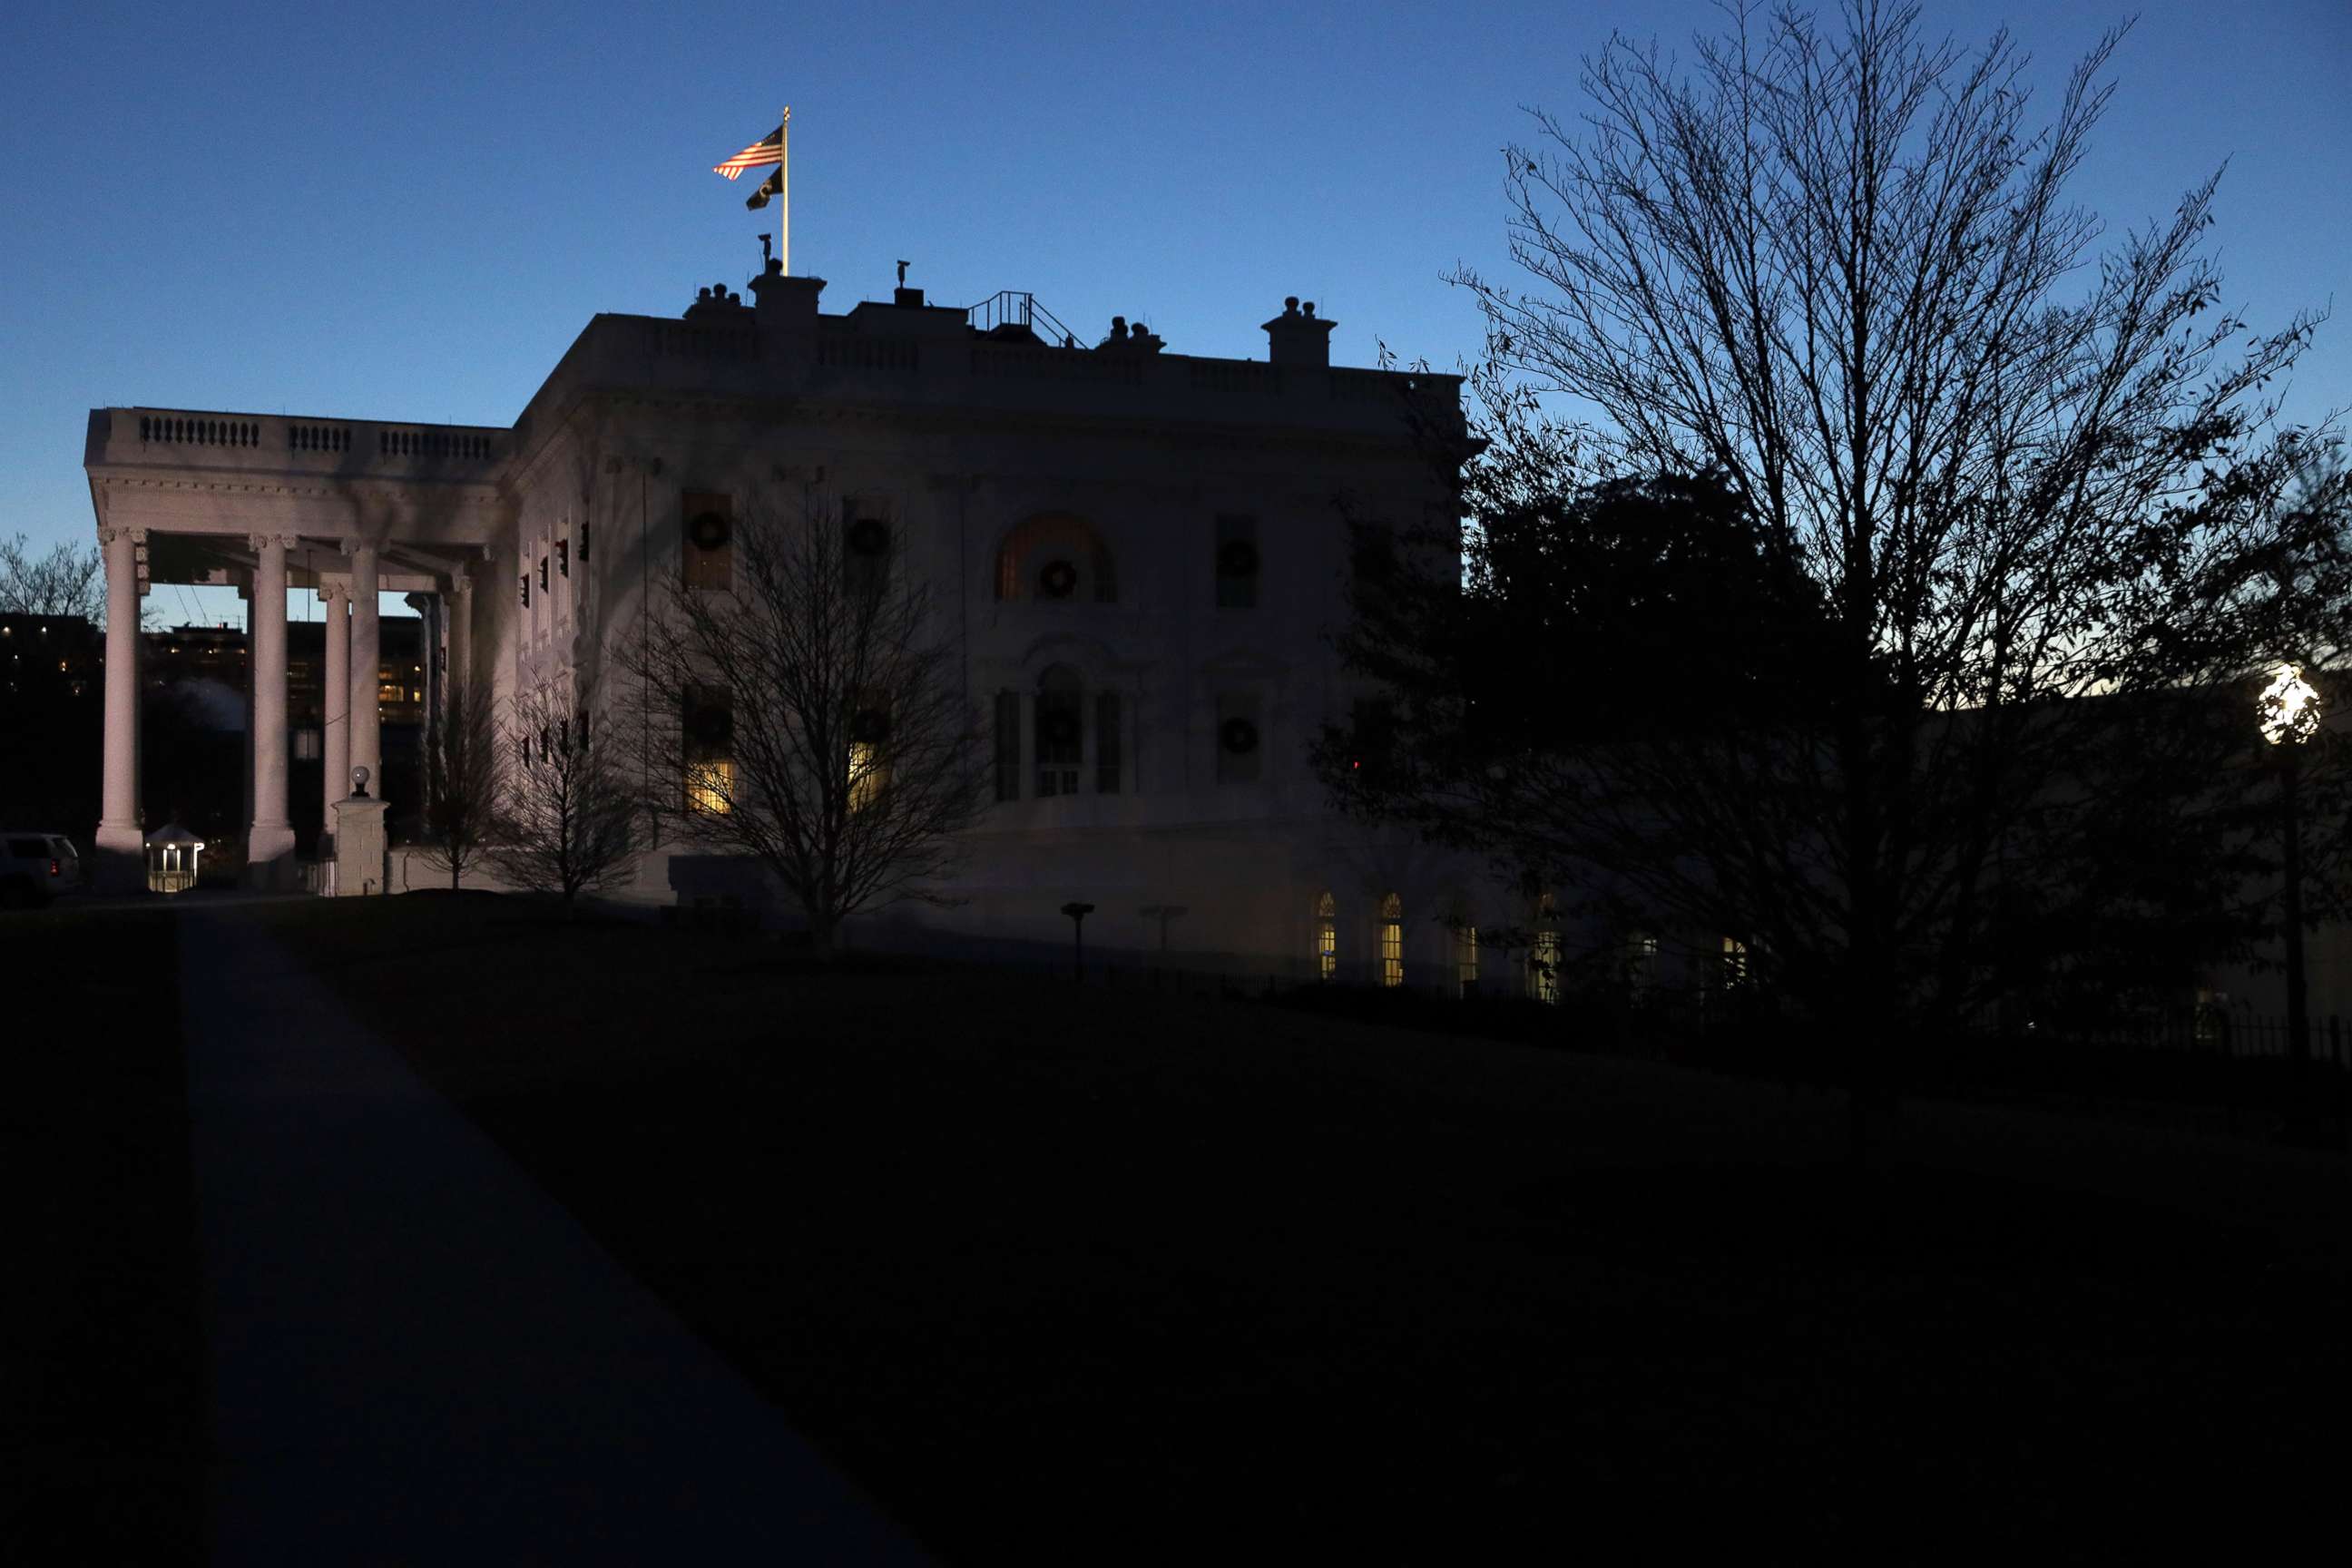 PHOTO: An exterior view of the White House is seen Dec. 18, 2019 in Washington, D.C., the day the U.S. House of Representatives is expected to vote on the two impeachment articles against President Donald Trump.